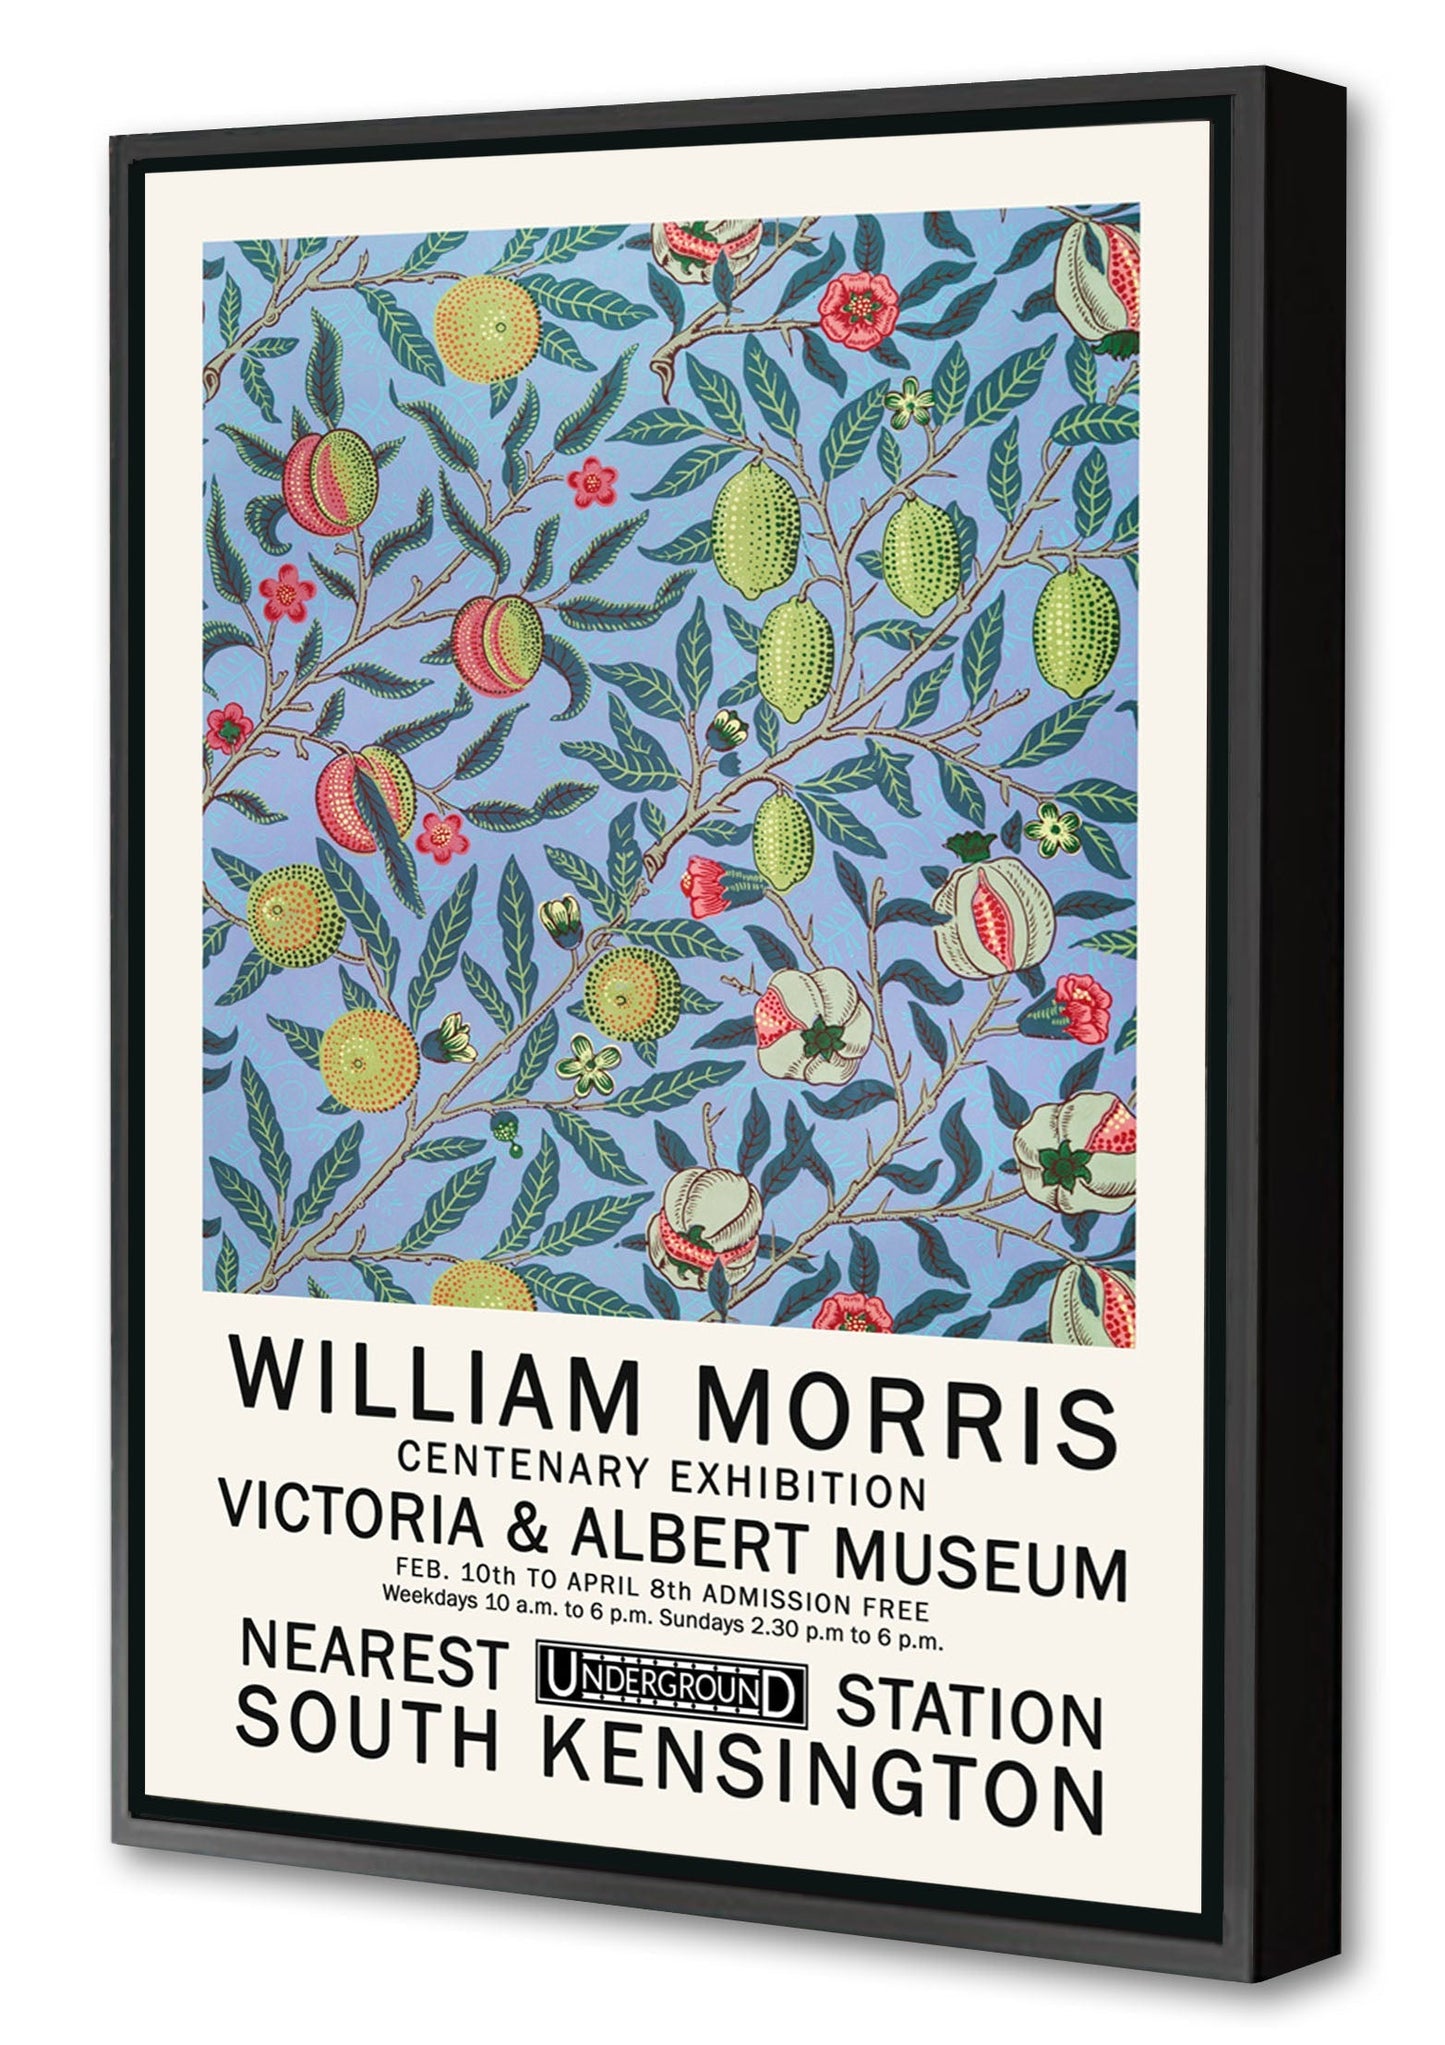 William Morris 3-expositions, print-Canvas Print with Box Frame-40 x 60 cm-BLUE SHAKER